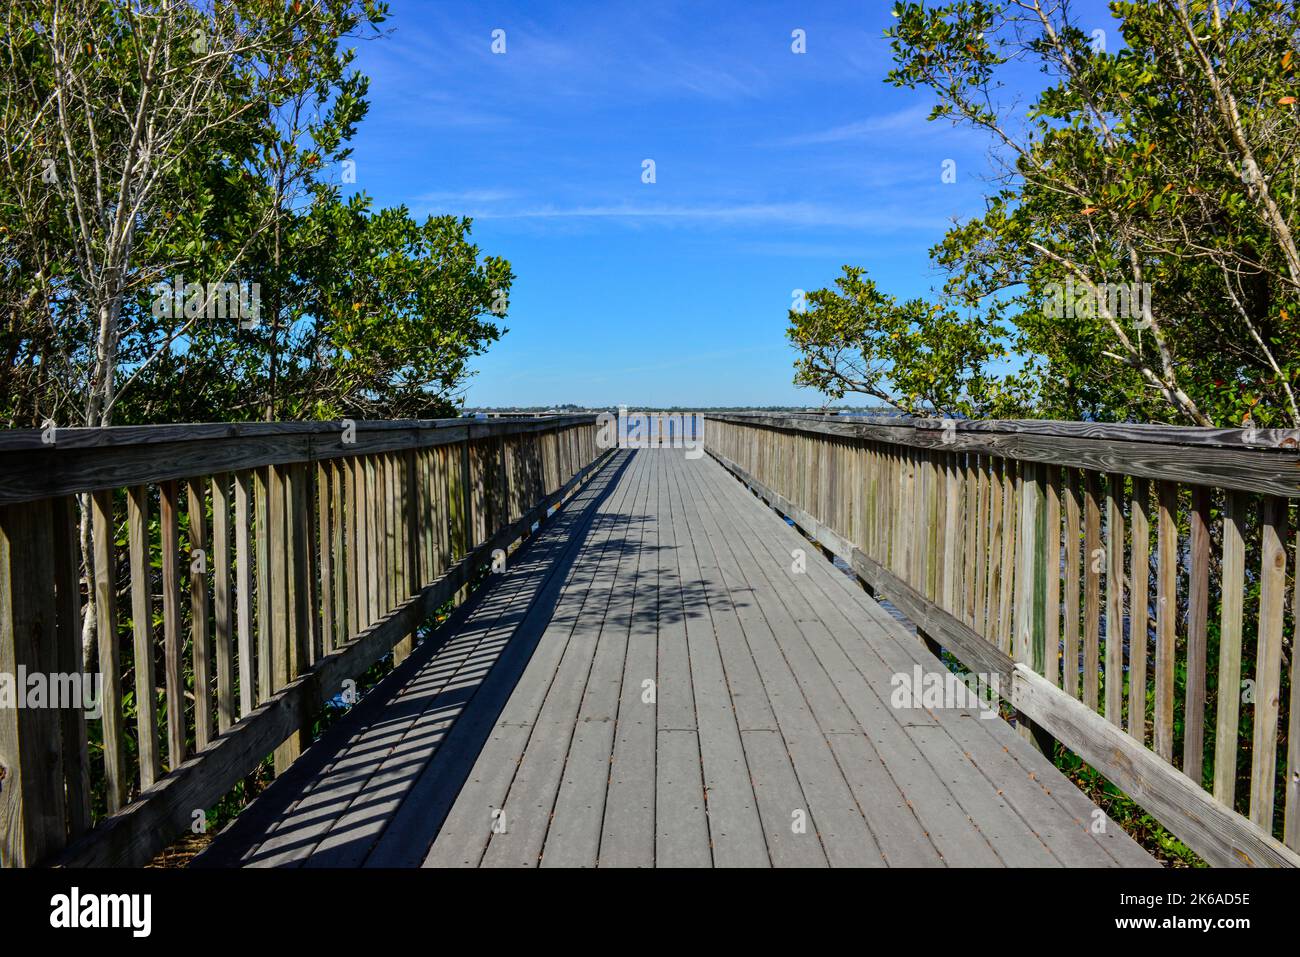 View across the Peace River between Port Charlotte and Punta Gorda, Florida from a recreational path with observation decks in Trabue Park Stock Photo